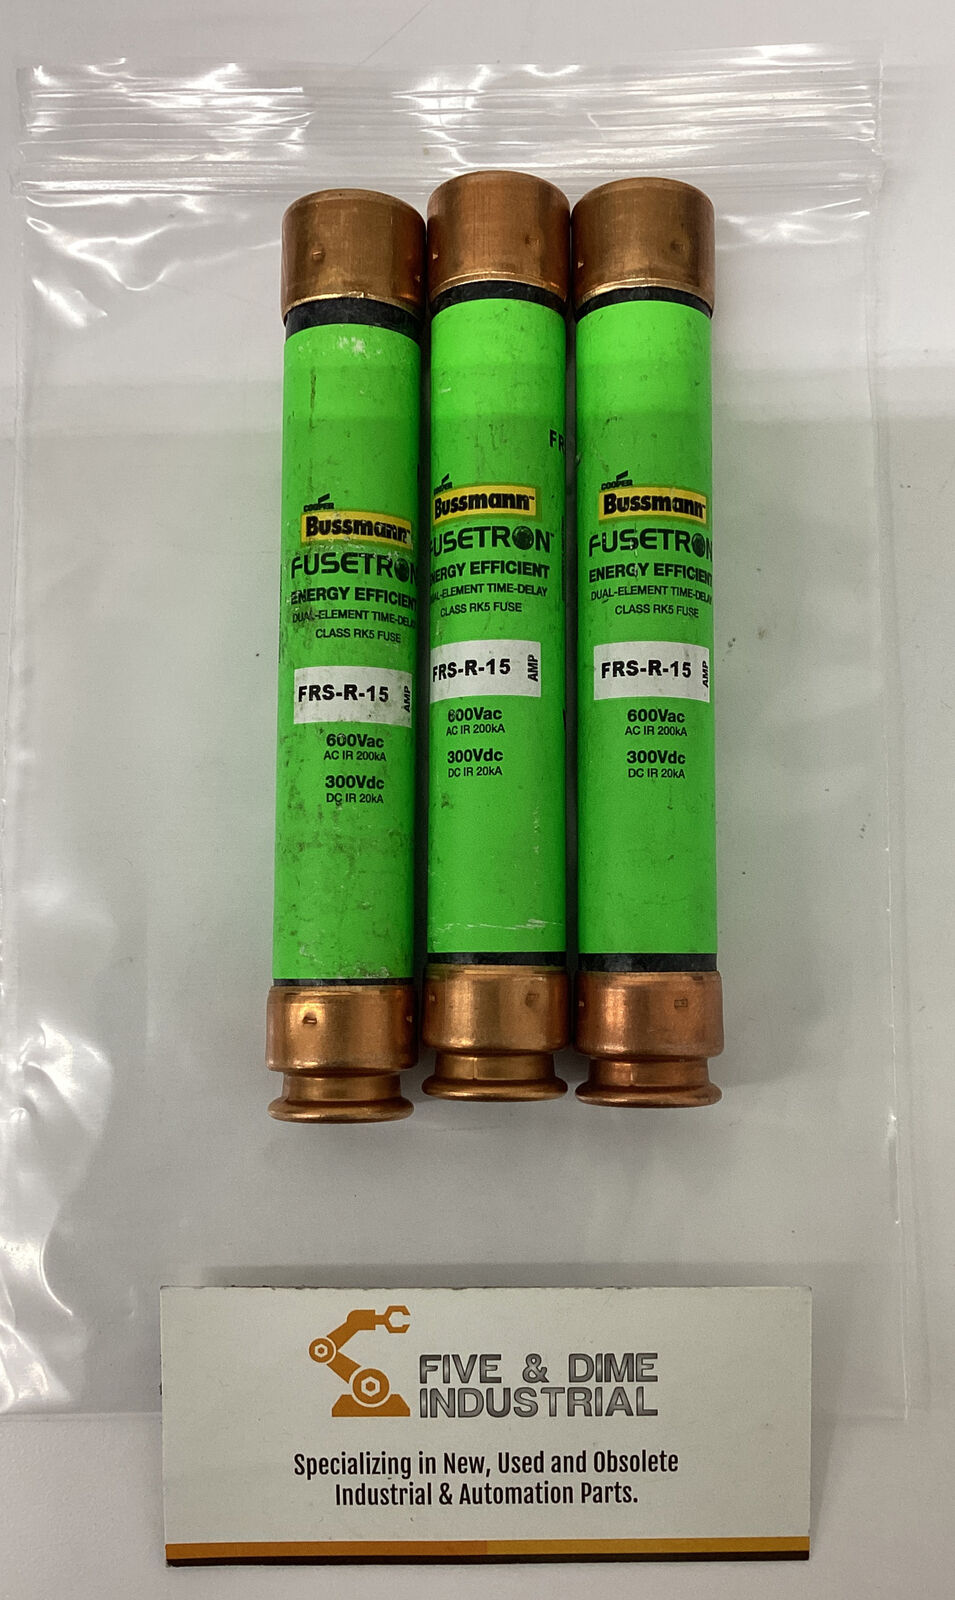 Bussmann Fusetron FRS-R-15 Lot of 3  Class RK5 fuses (YE251)